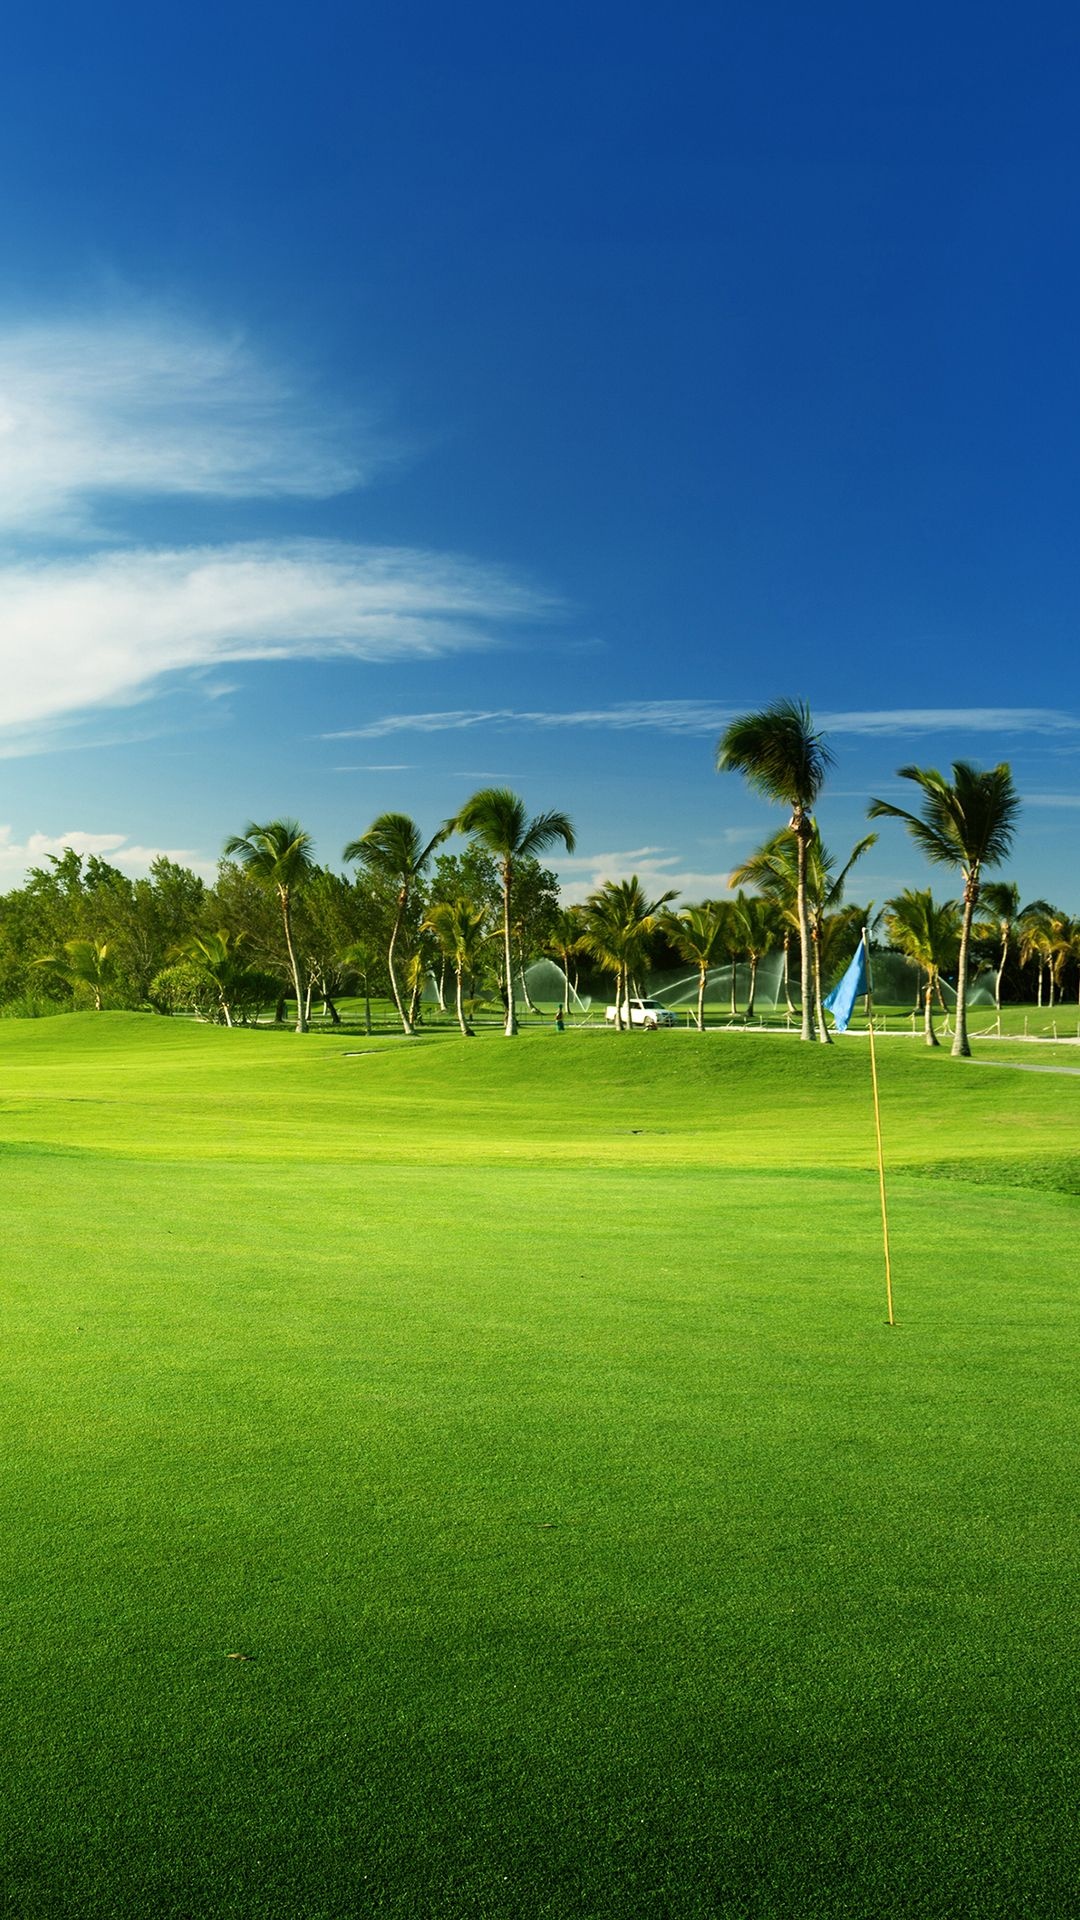 Golf Course: Par-3 field, Nine or eighteen holes all of which have a par of three strokes. 1080x1920 Full HD Wallpaper.